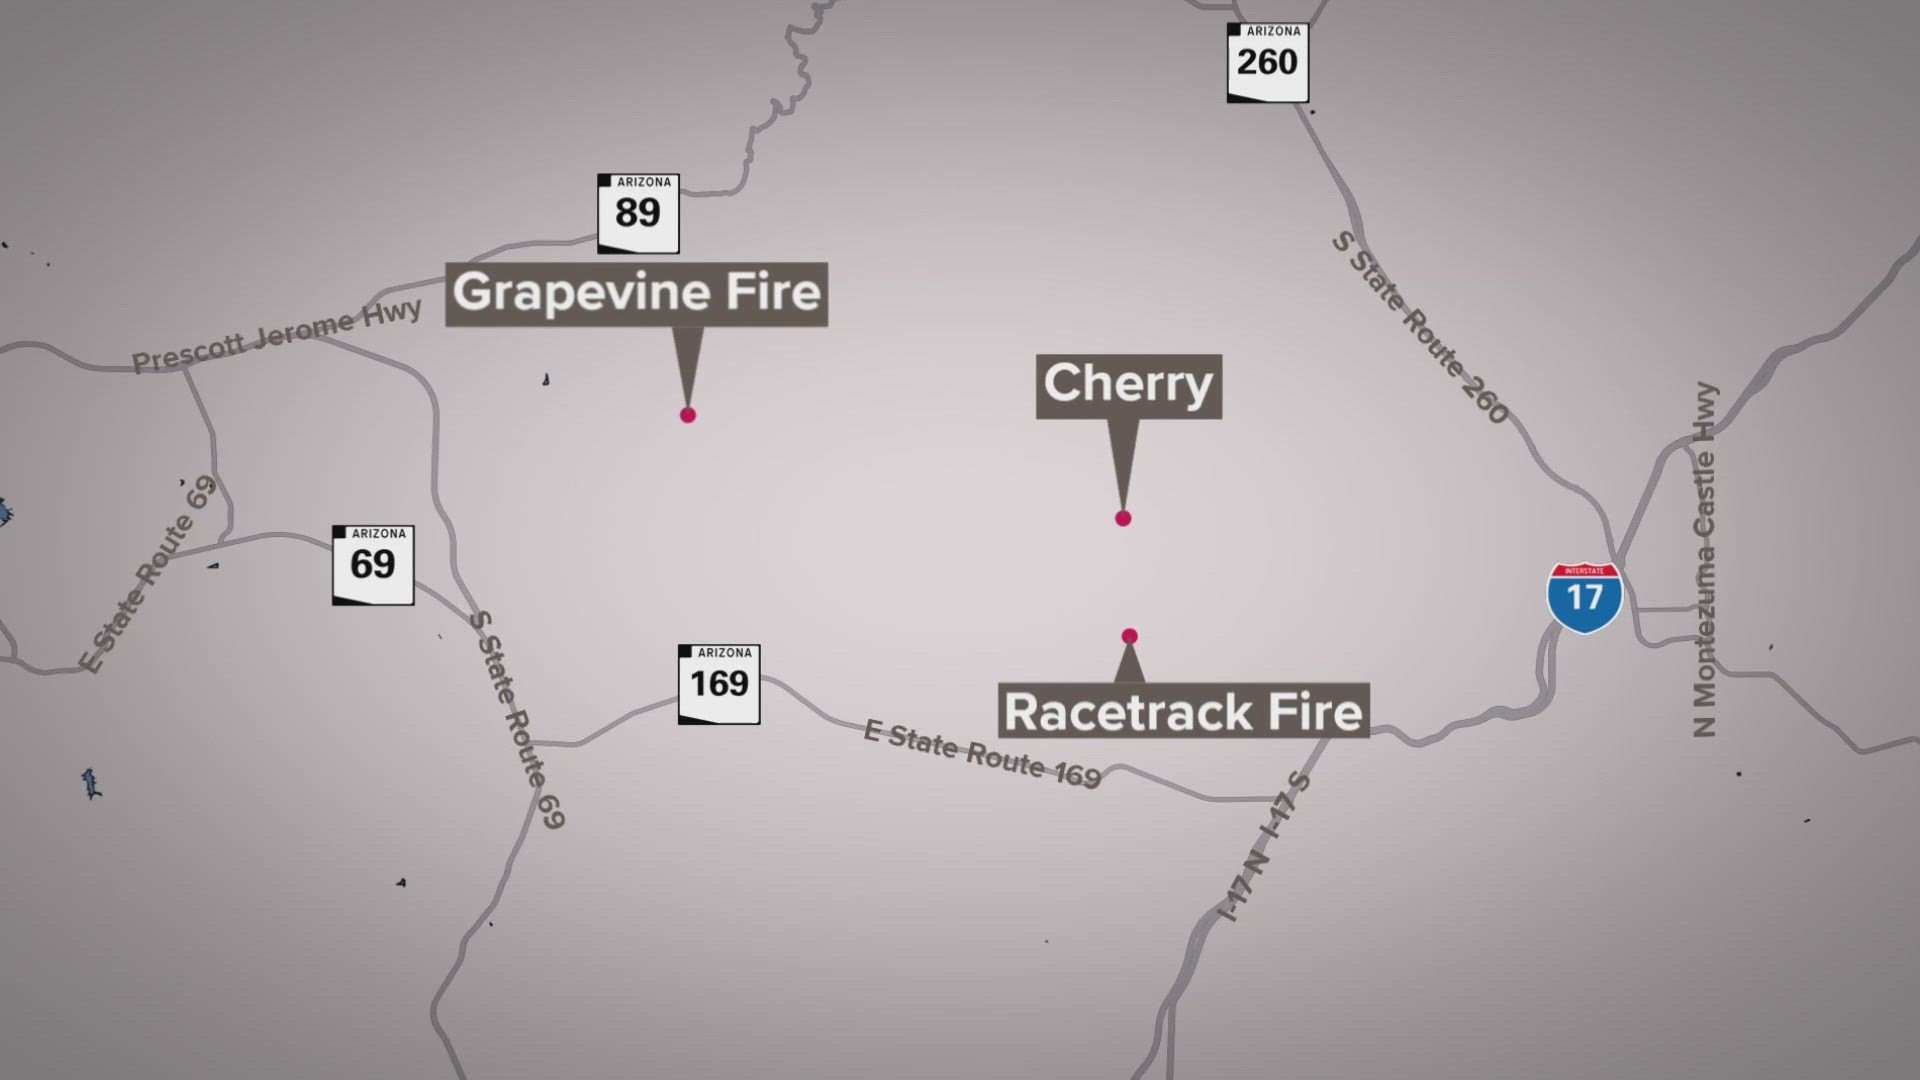 The area being threatened by the fire is near Federal Mine and Cherry Creek roads.